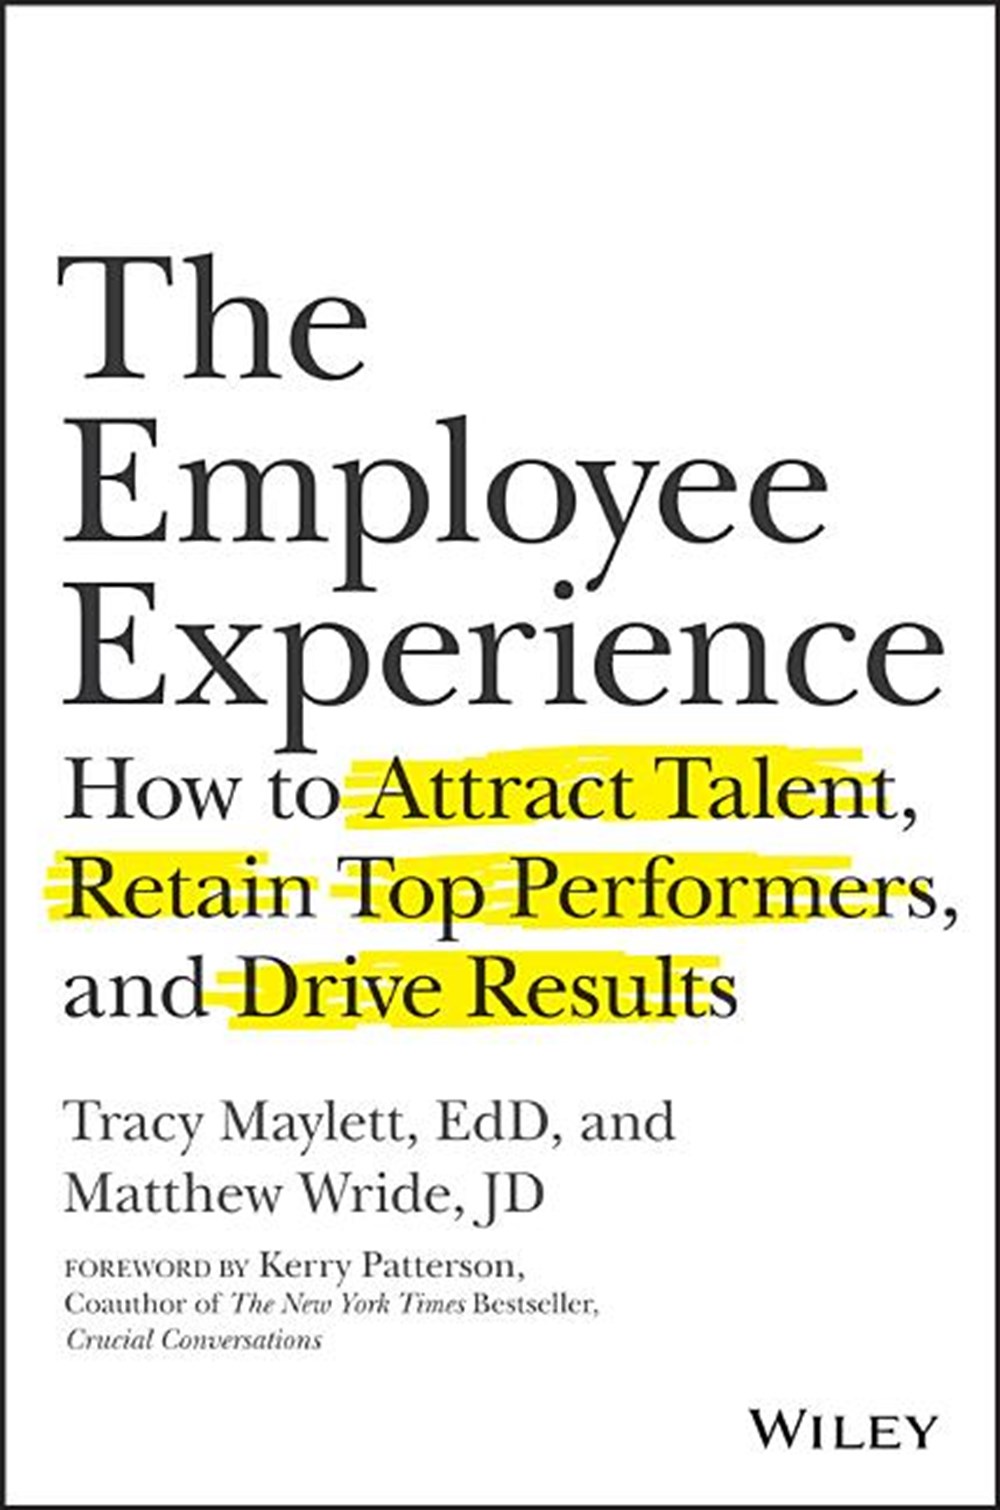 Employee Experience: How to Attract Talent, Retain Top Performers, and Drive Results